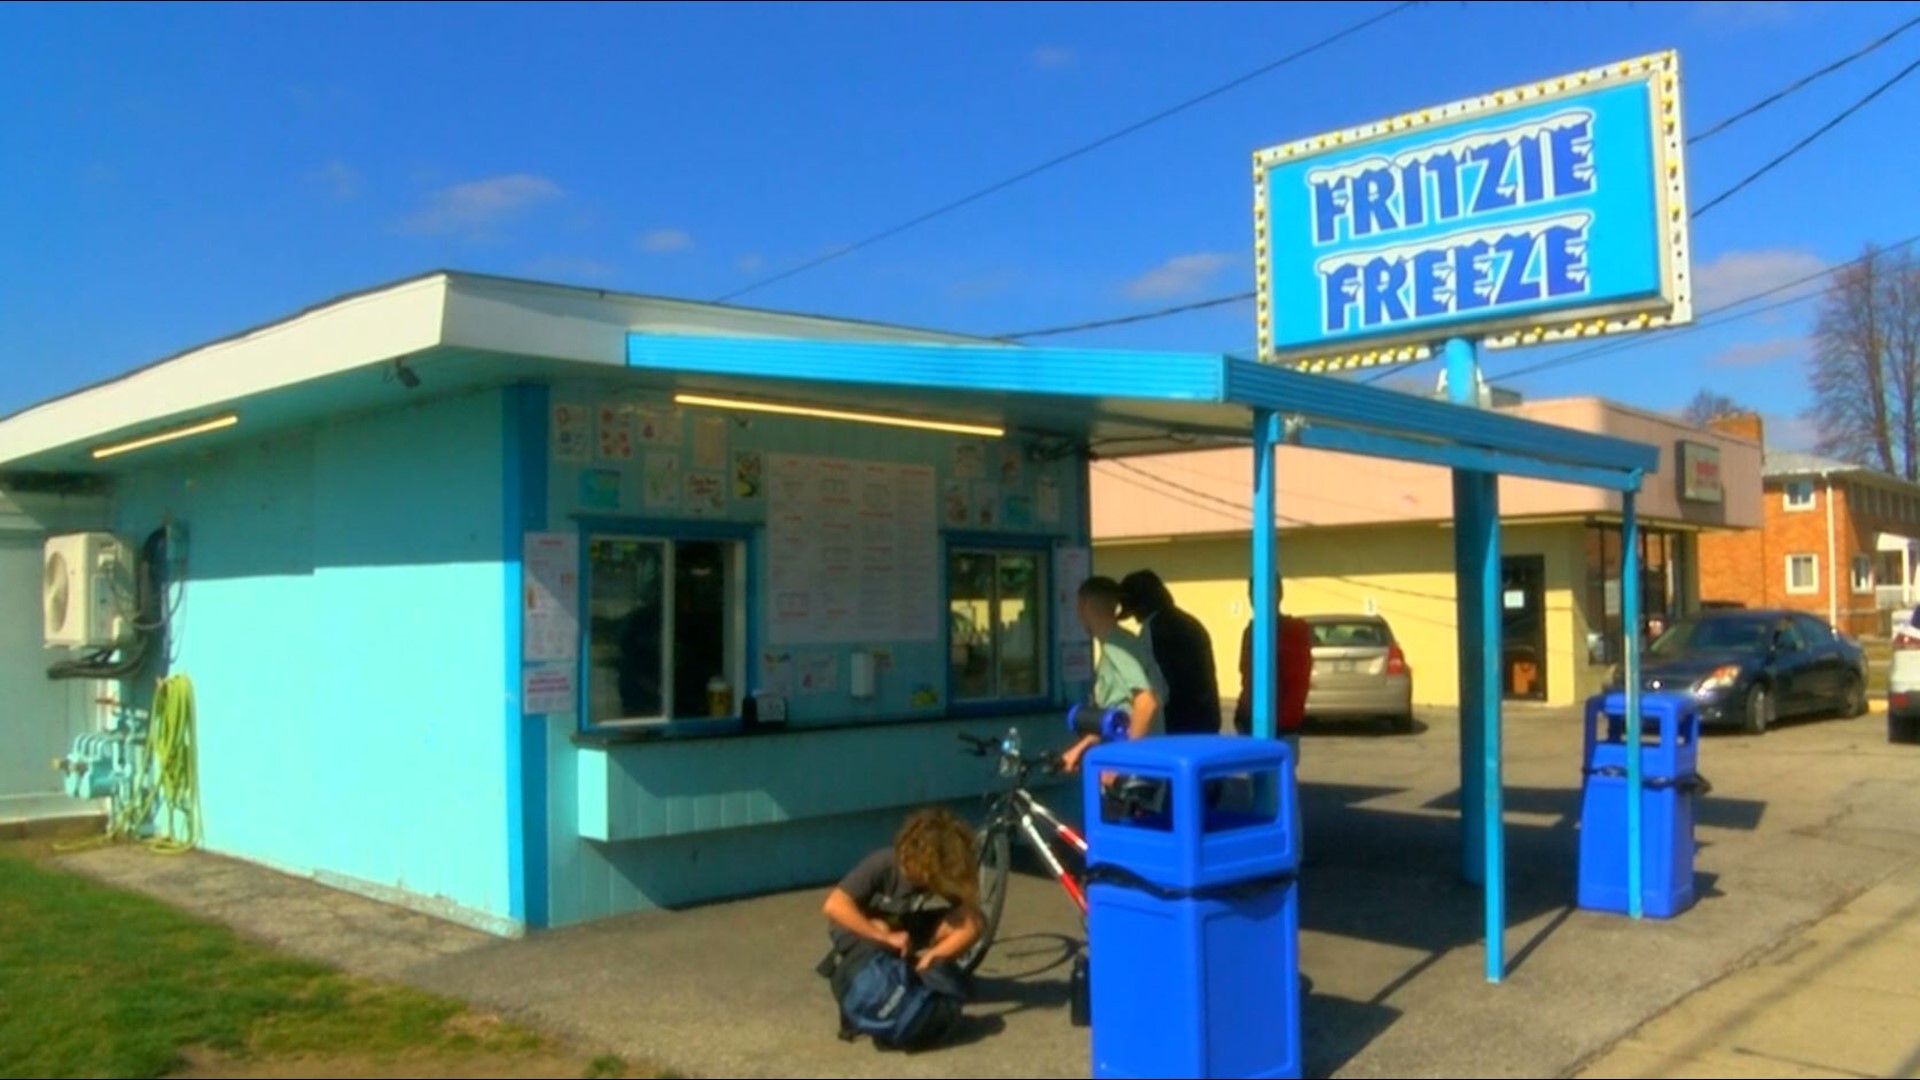 Unseasonably warm temperatures in the 70s brought out the ice cream lovers on Sunday. Fritzie Freeze in the Point was one of the shops that saw big business.